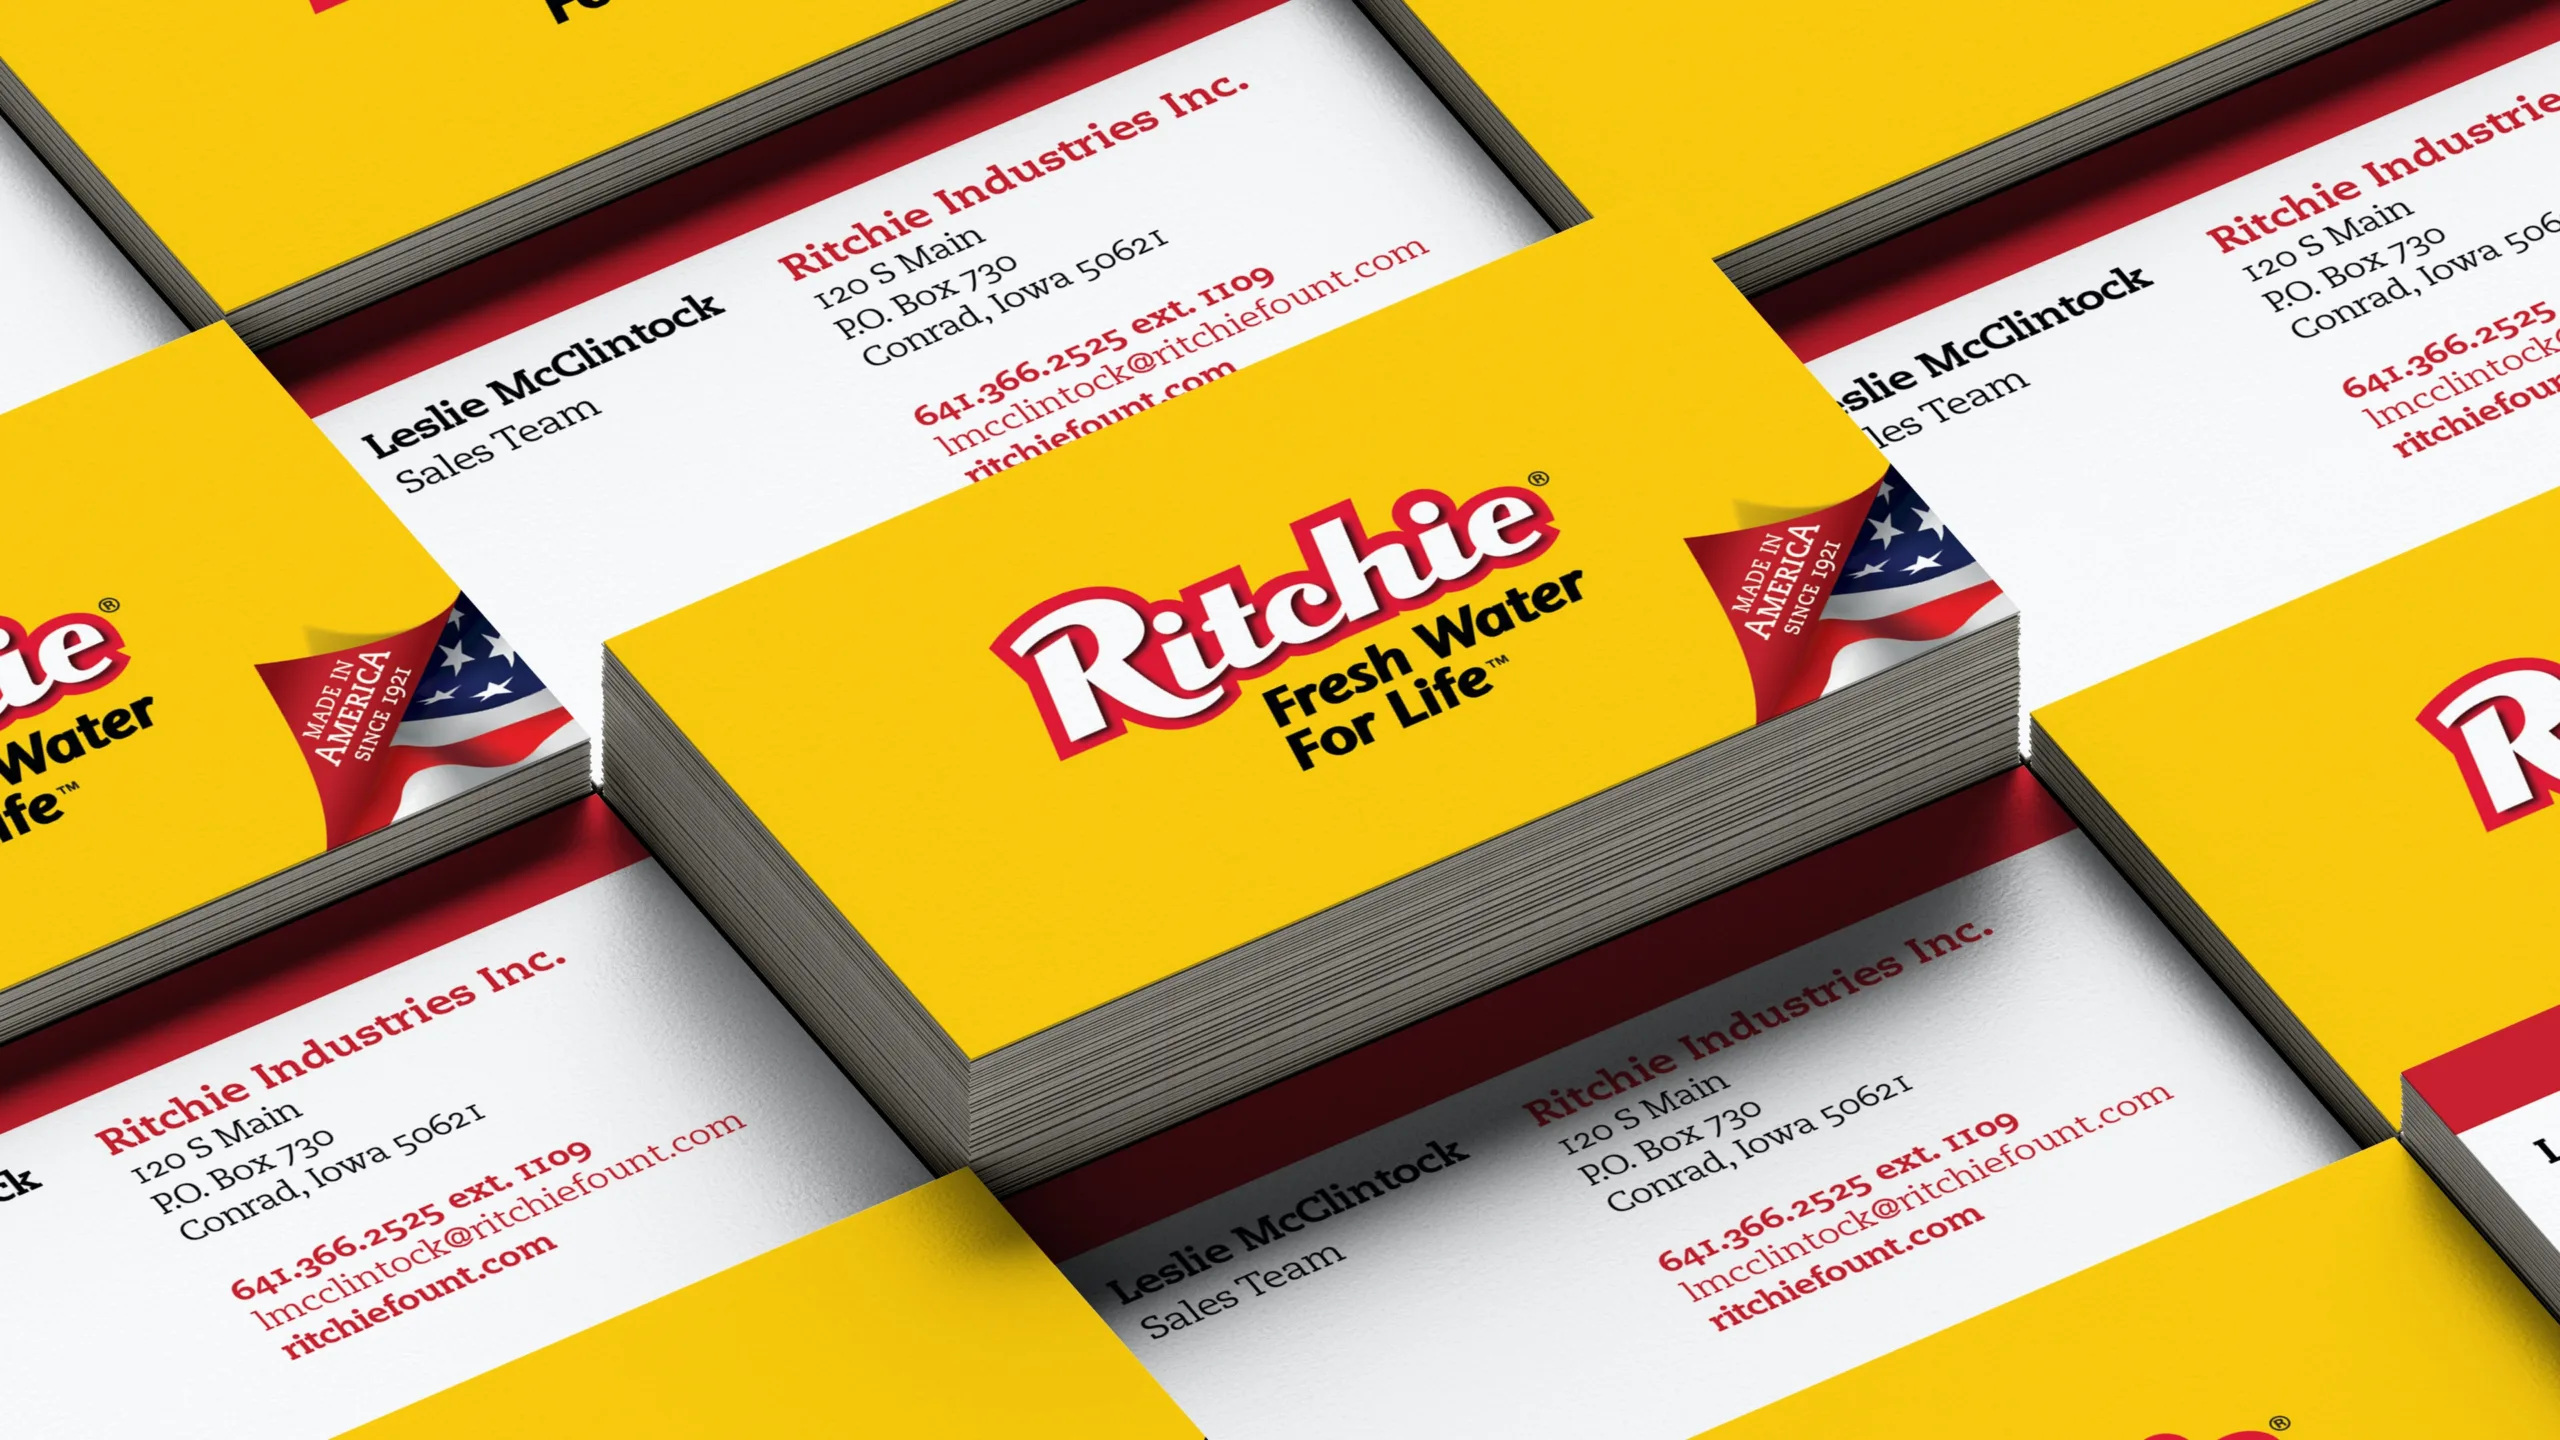 Ritchie business cards